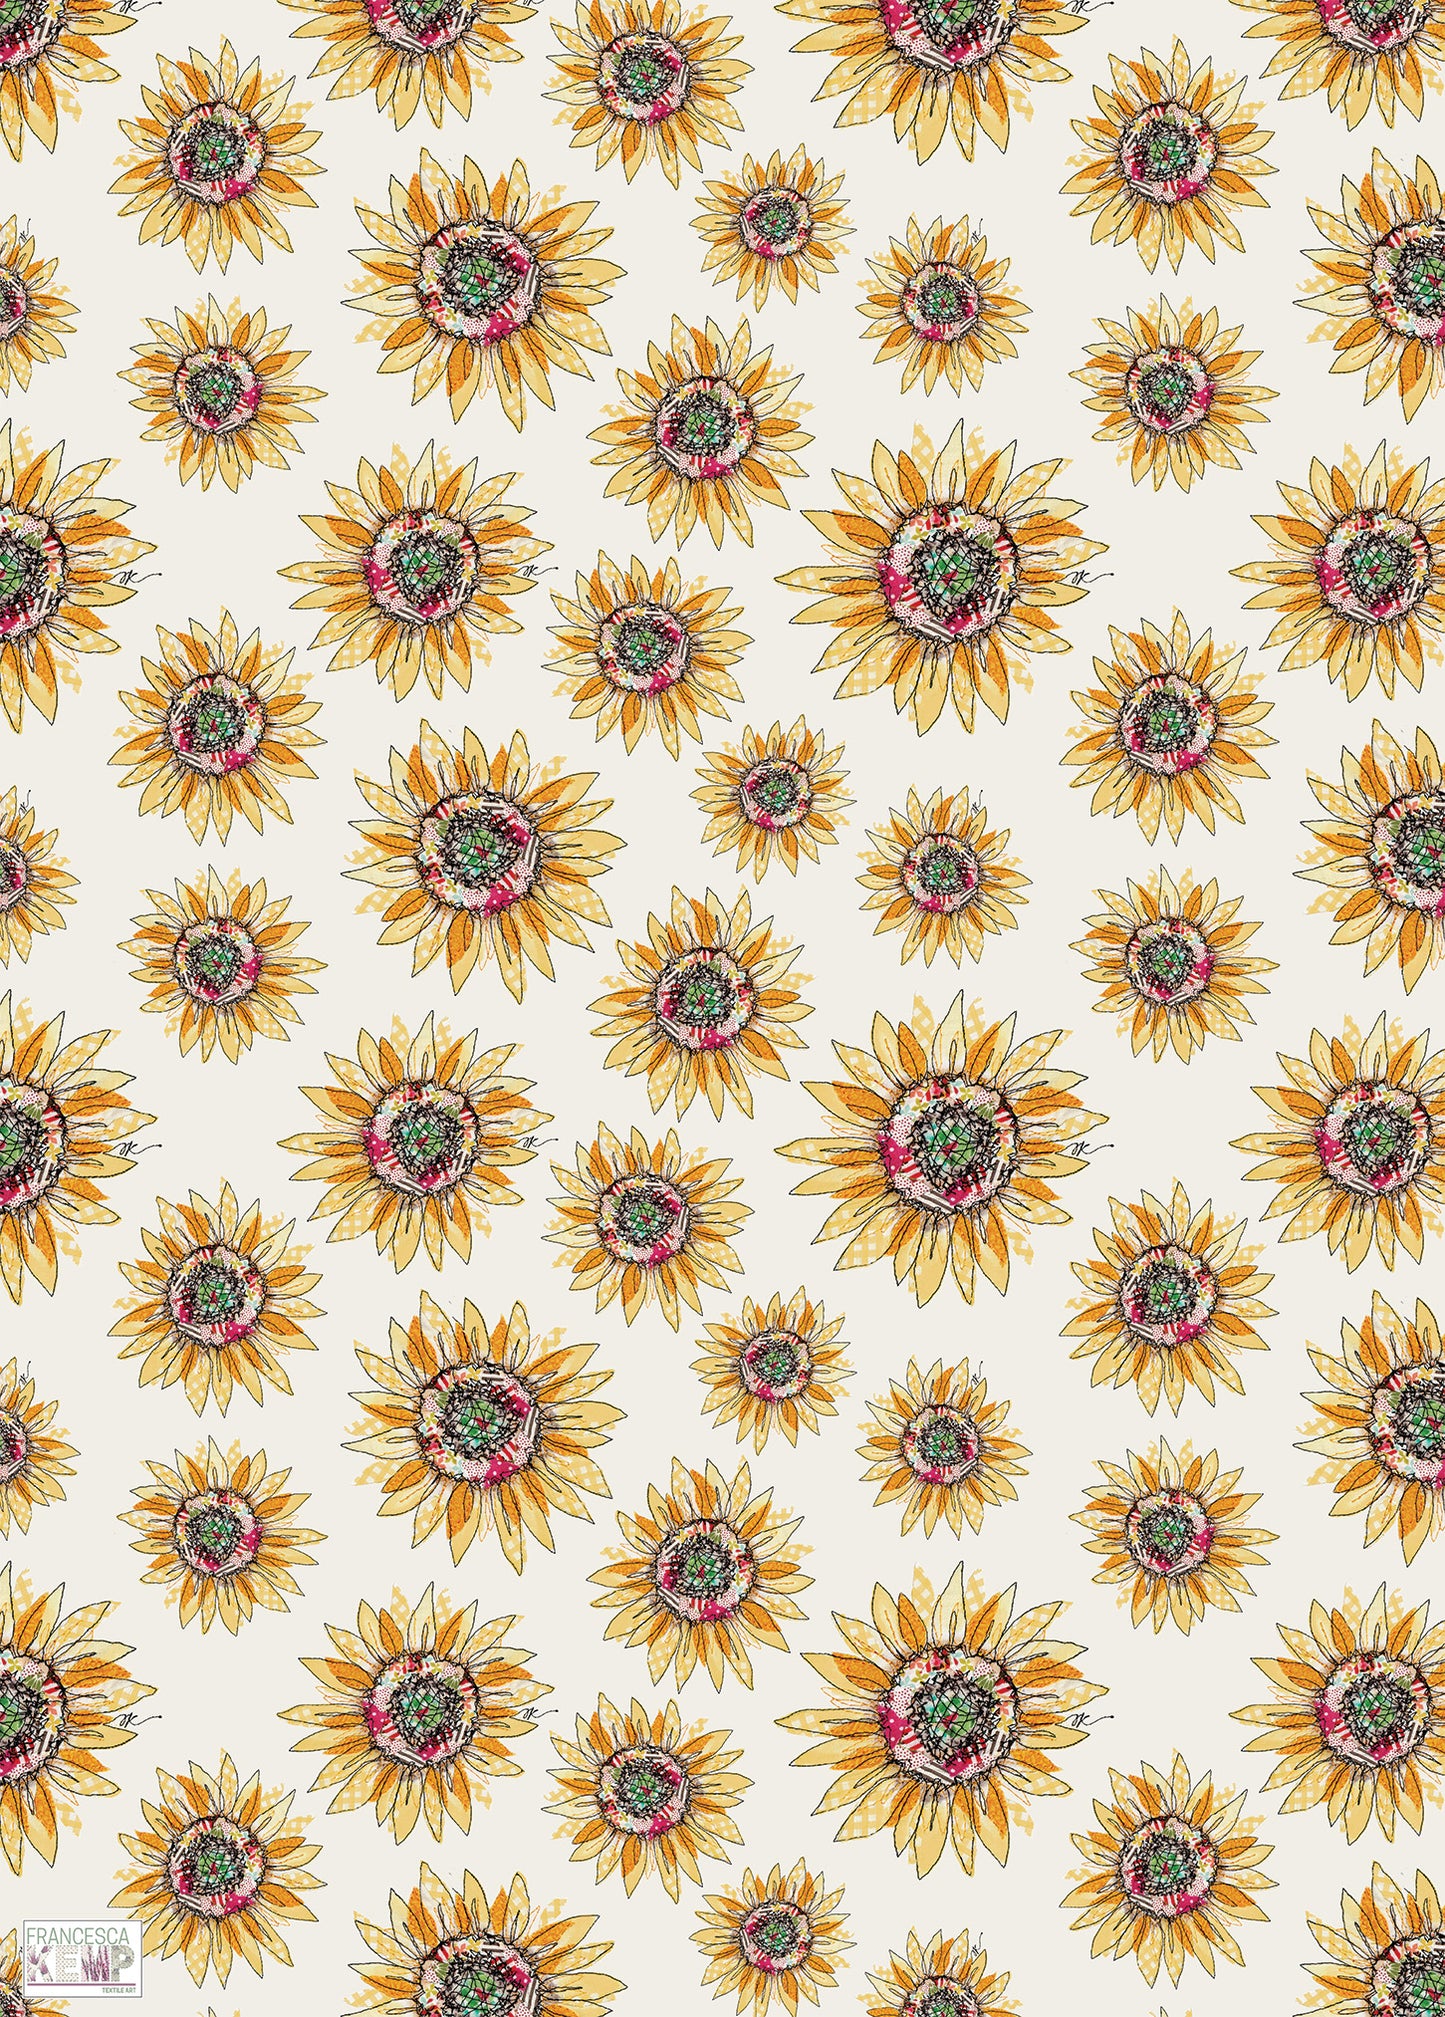 Sunflower Fields Wrapping Paper